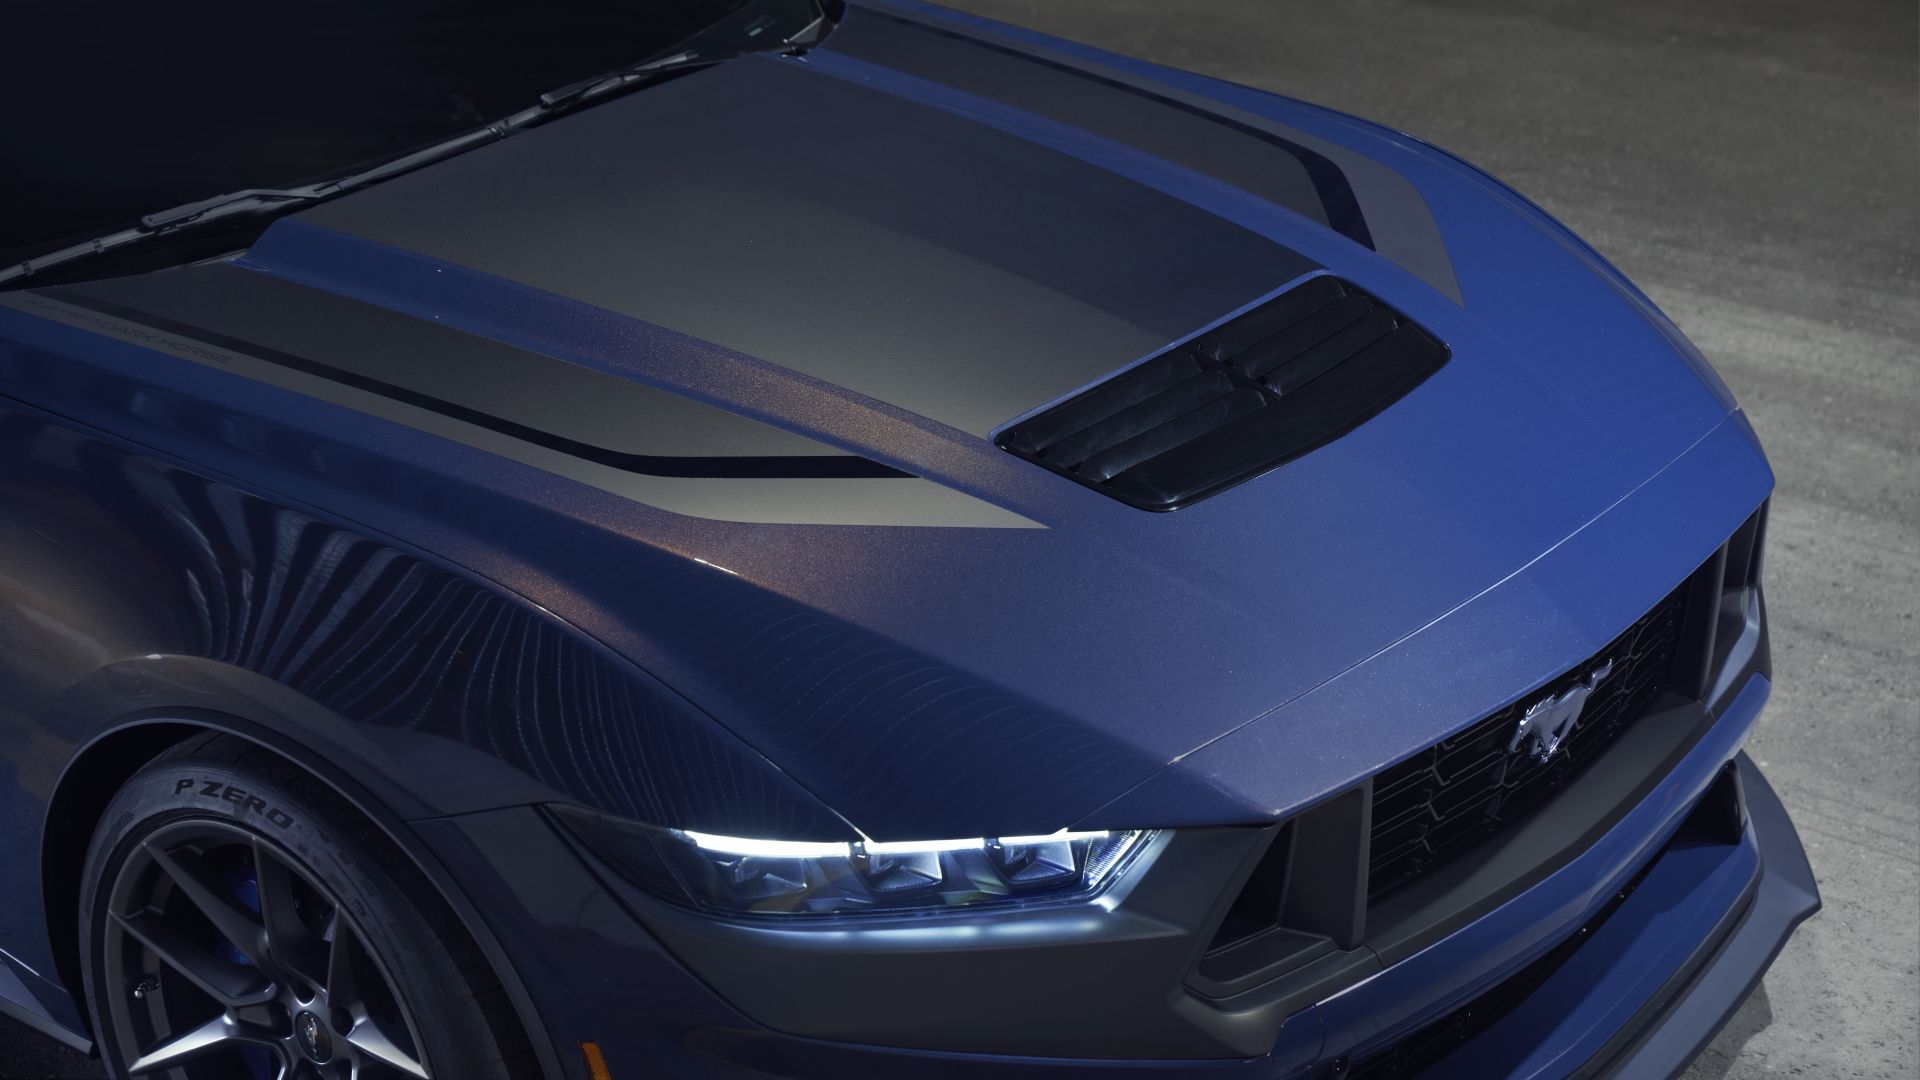 Close up of the front end of the 2022 Ford Mustang Dark Horse